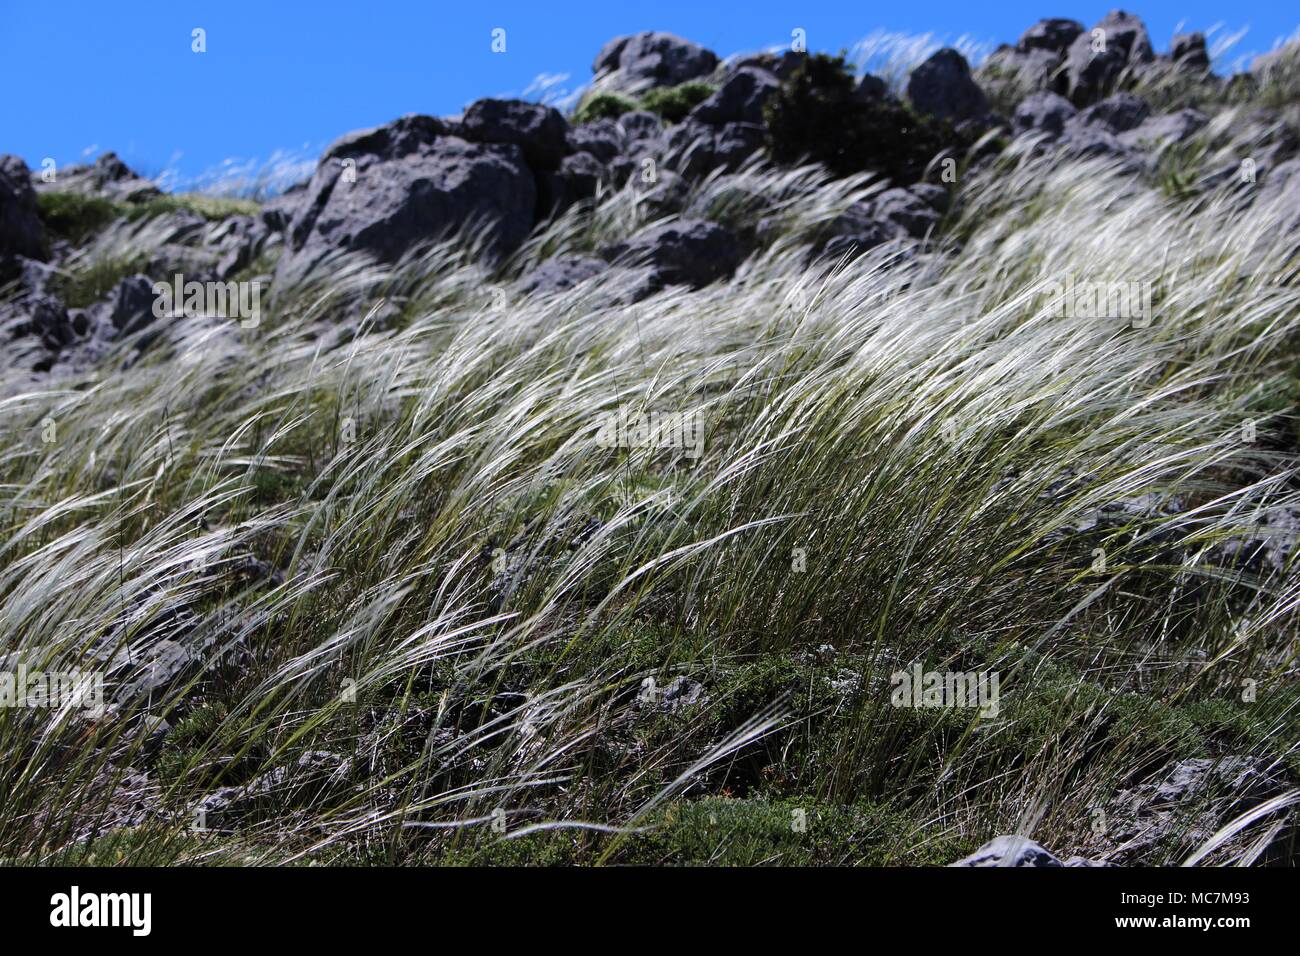 Rocky ground with flowers of Stipa (feather grass, needle grass, spear grass) on the mountain Paronon in Greece Stock Photo